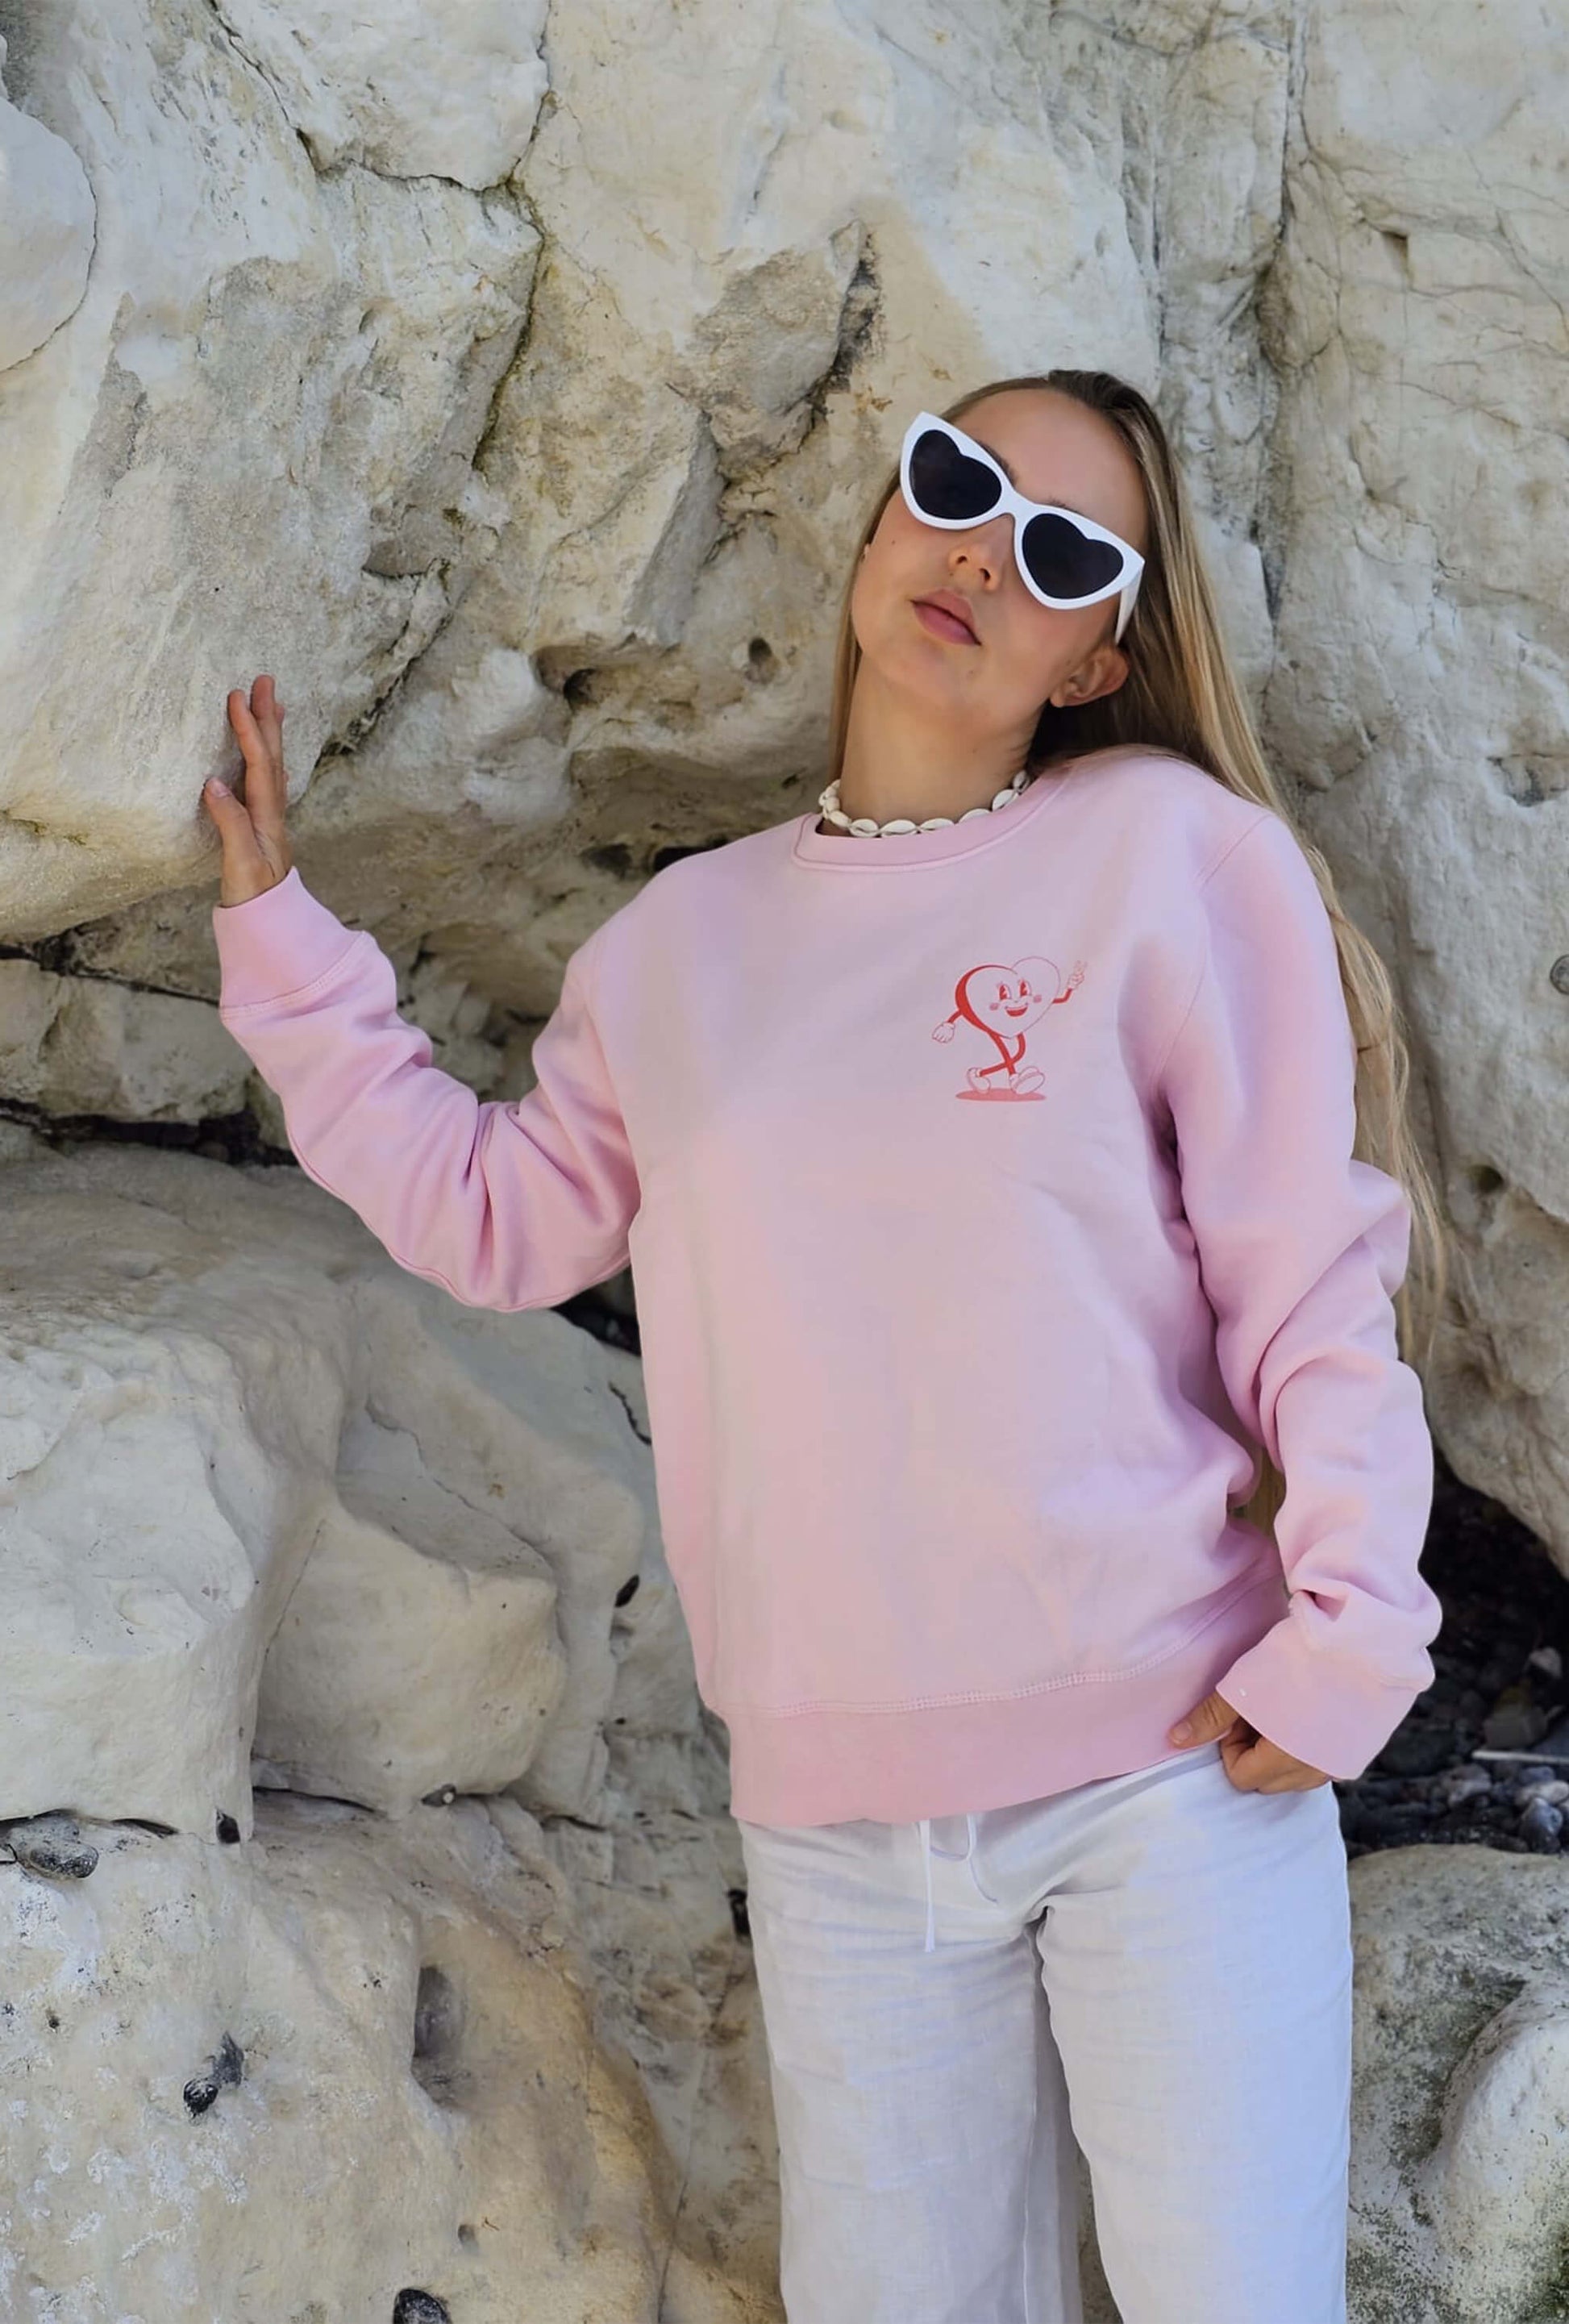 Pink positive sweater featuring heart mascot character